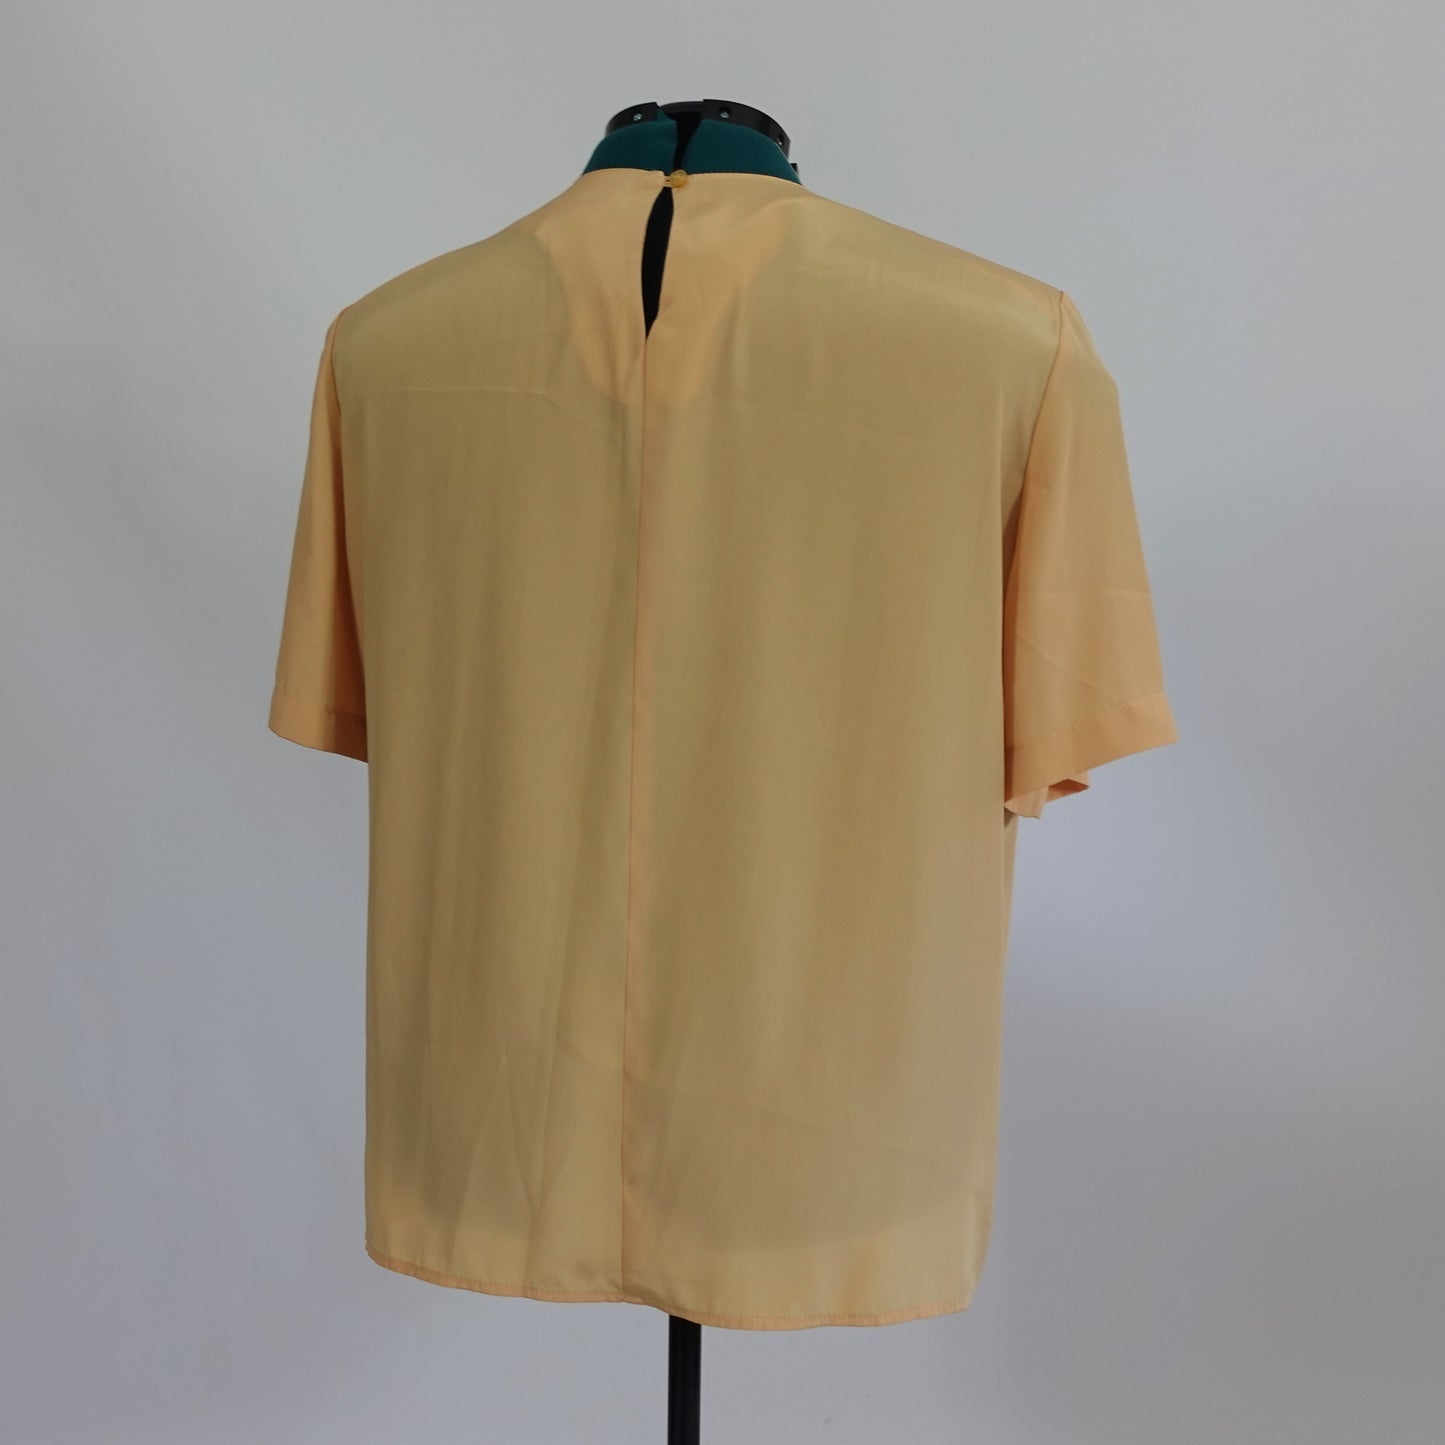 Vintage Pale Yellow Short Sleeve Top